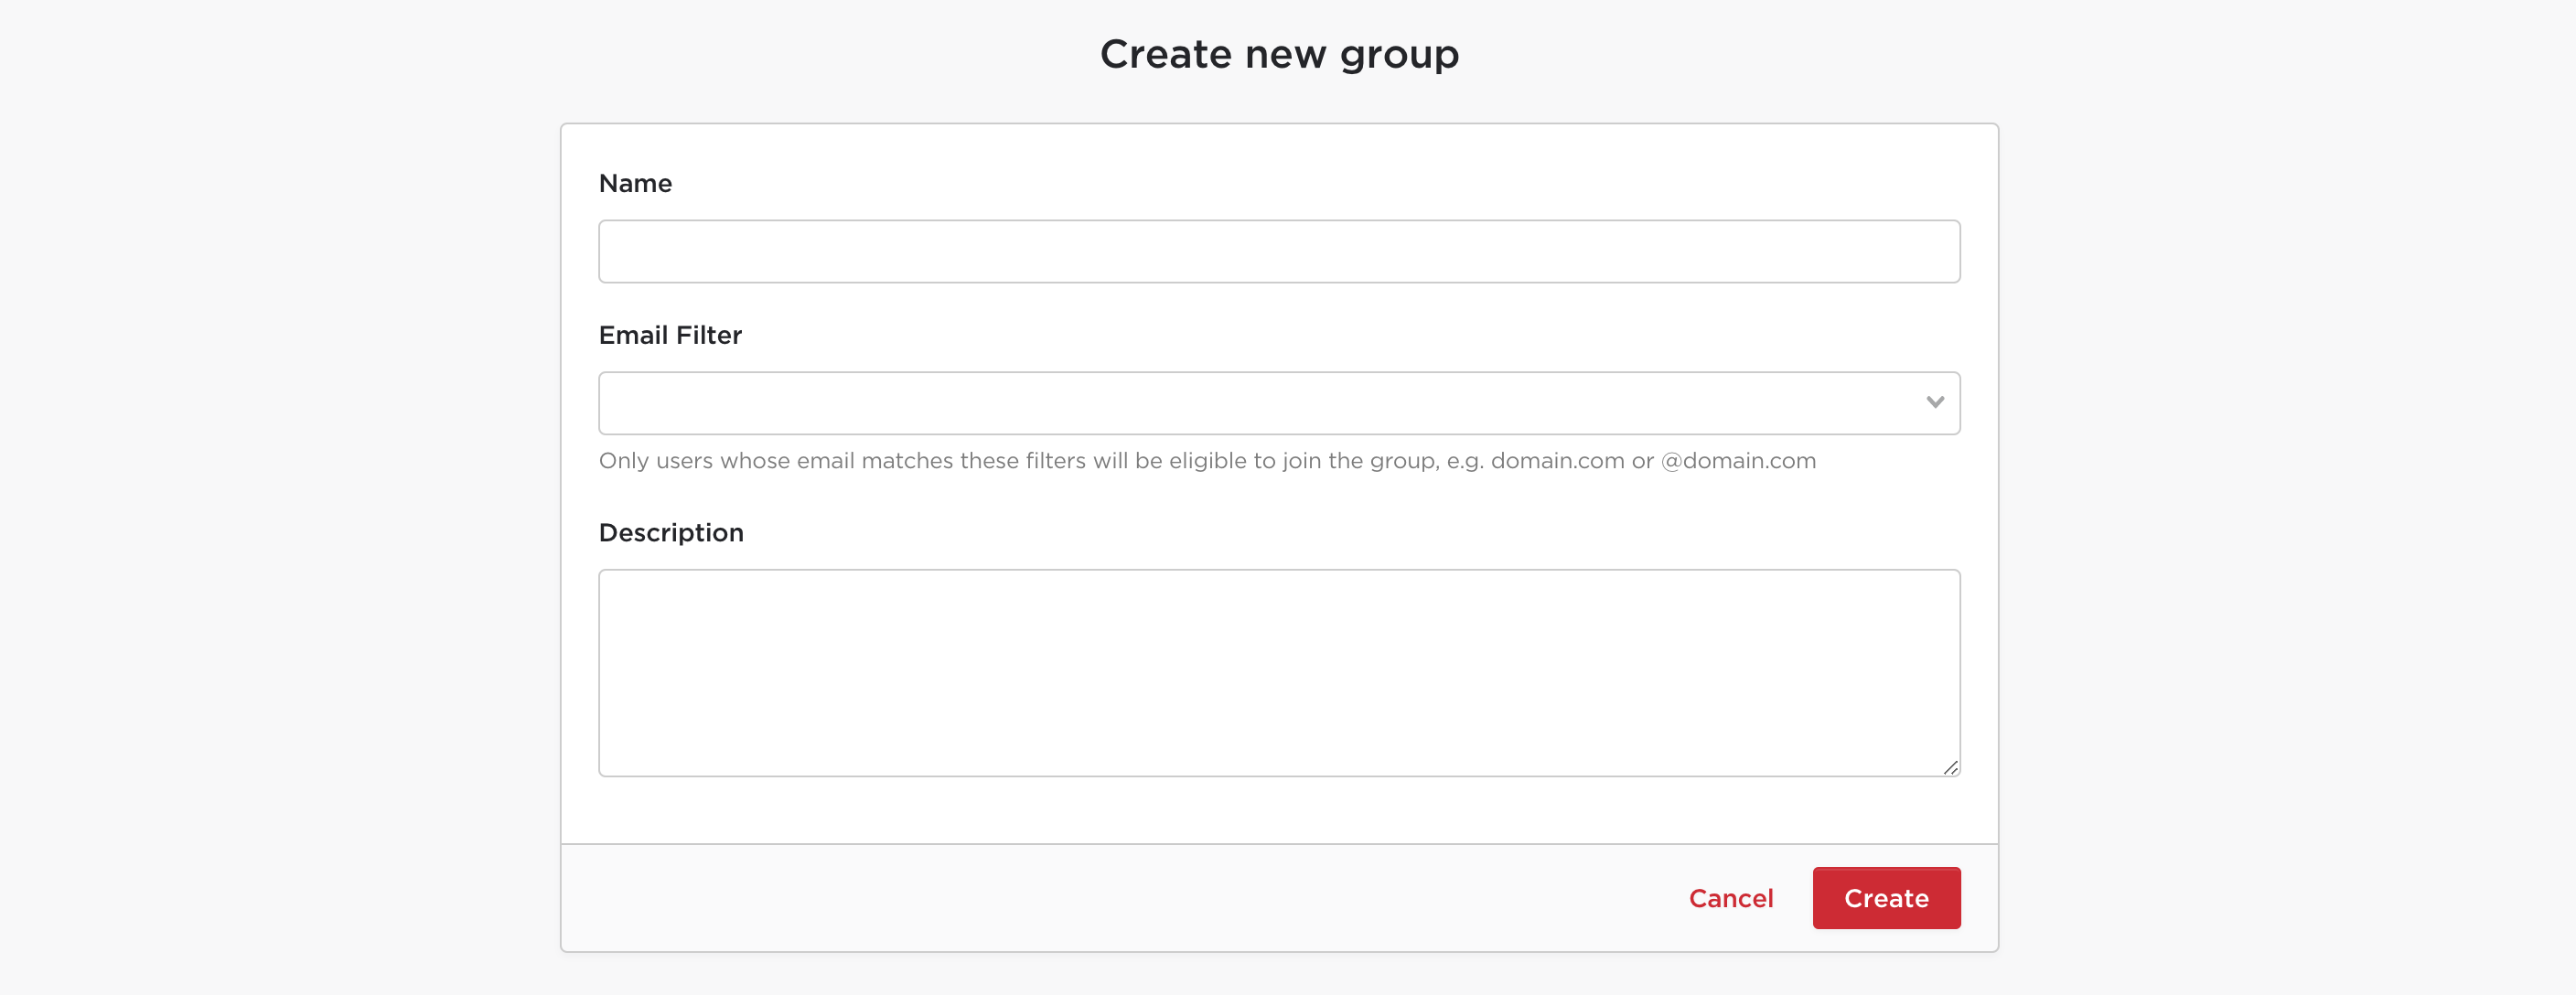 New Group Form